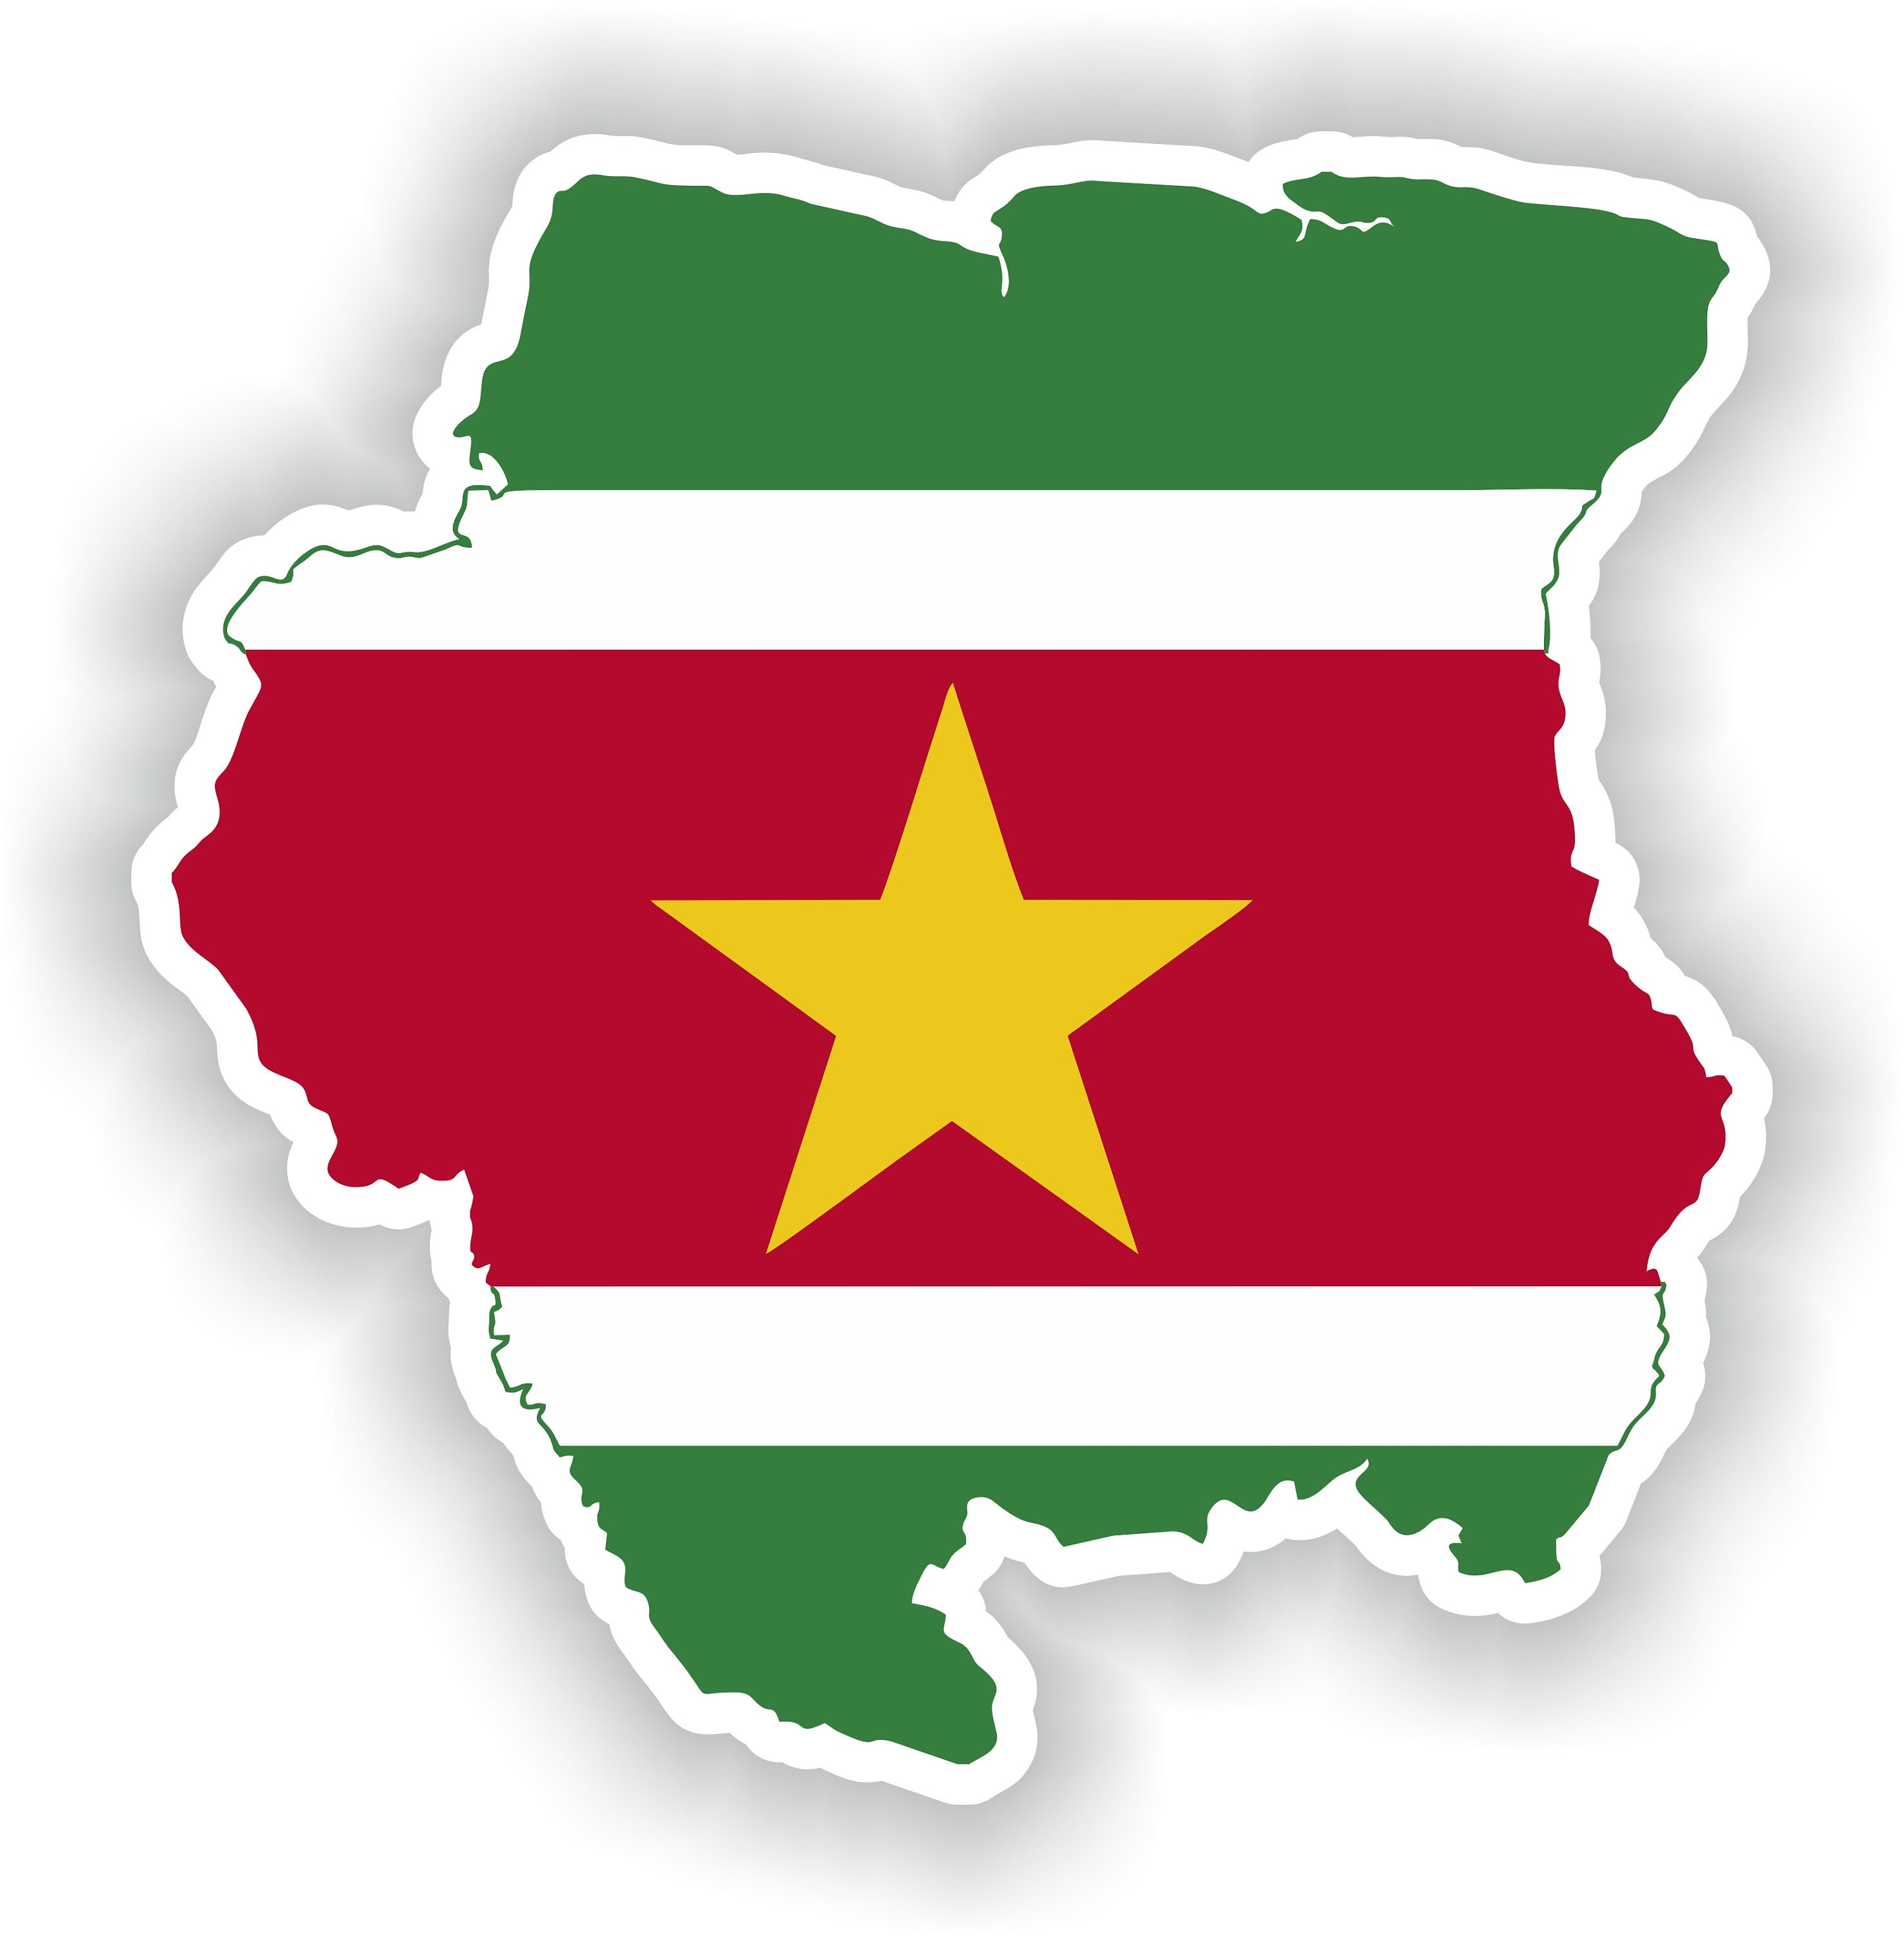 File:Flag map of Portugal.svg - Wikipedia